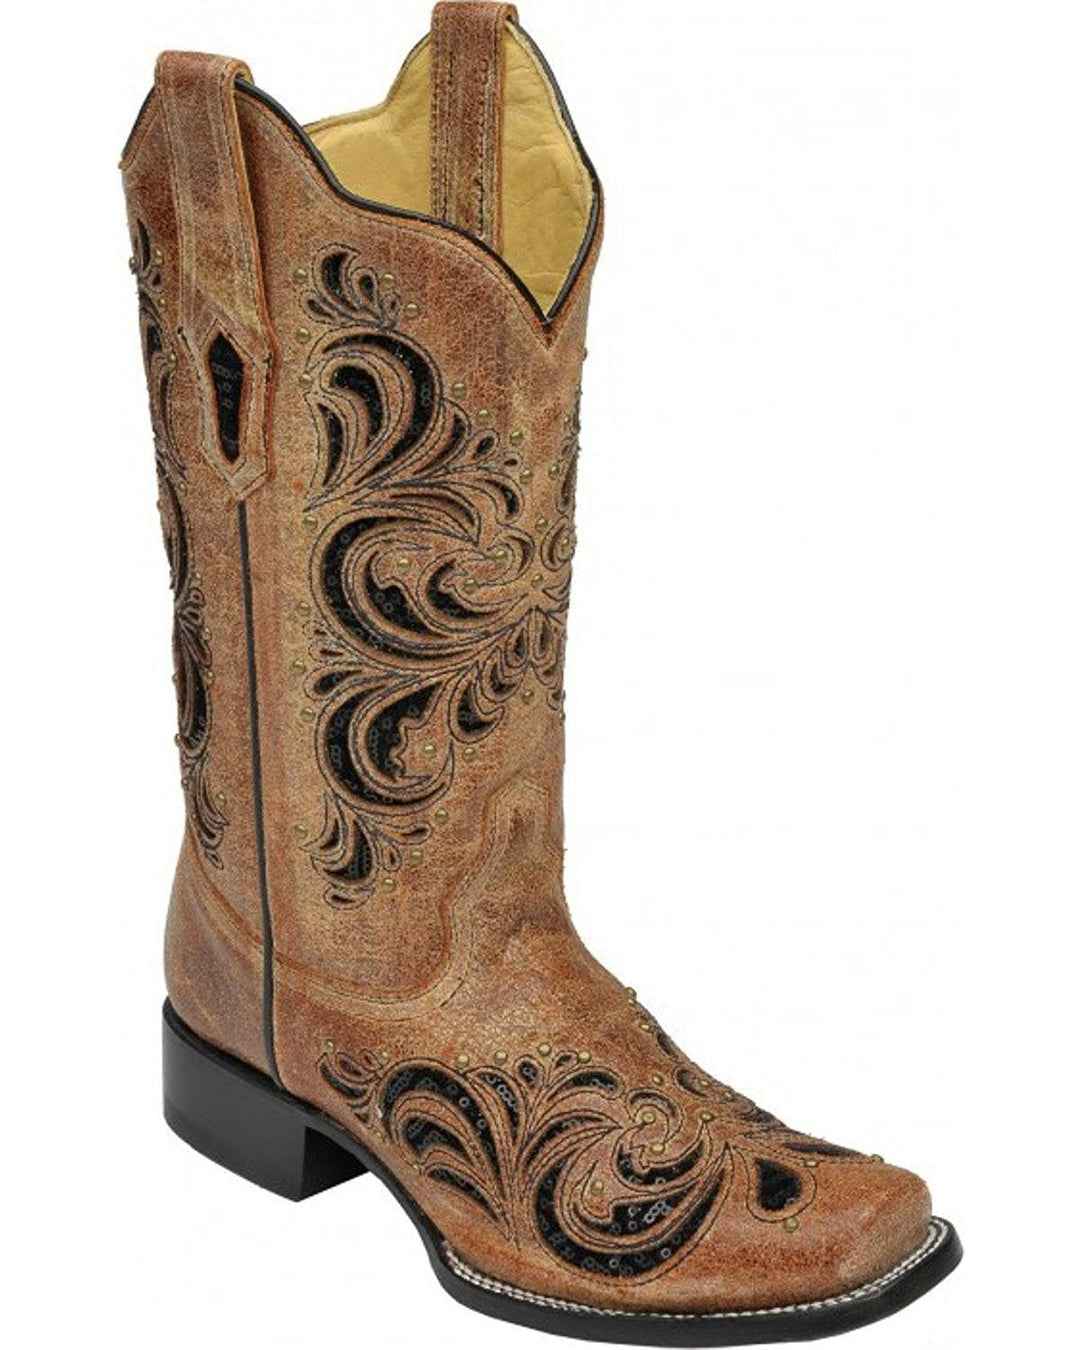 Corral Boots Women's R1289